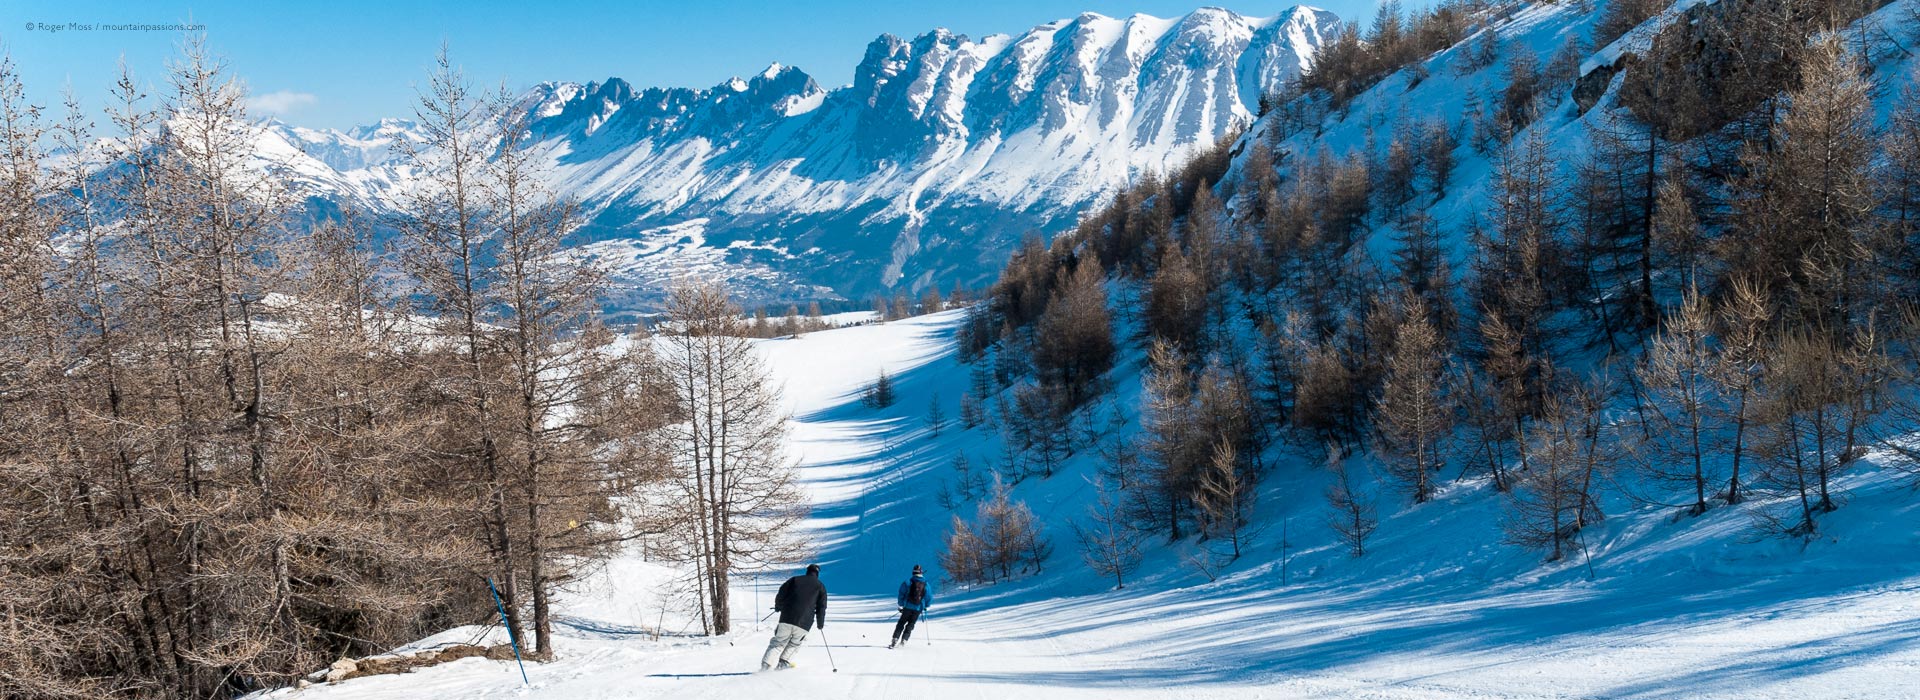 Two skiers descending tree-lined piste with mountain background.